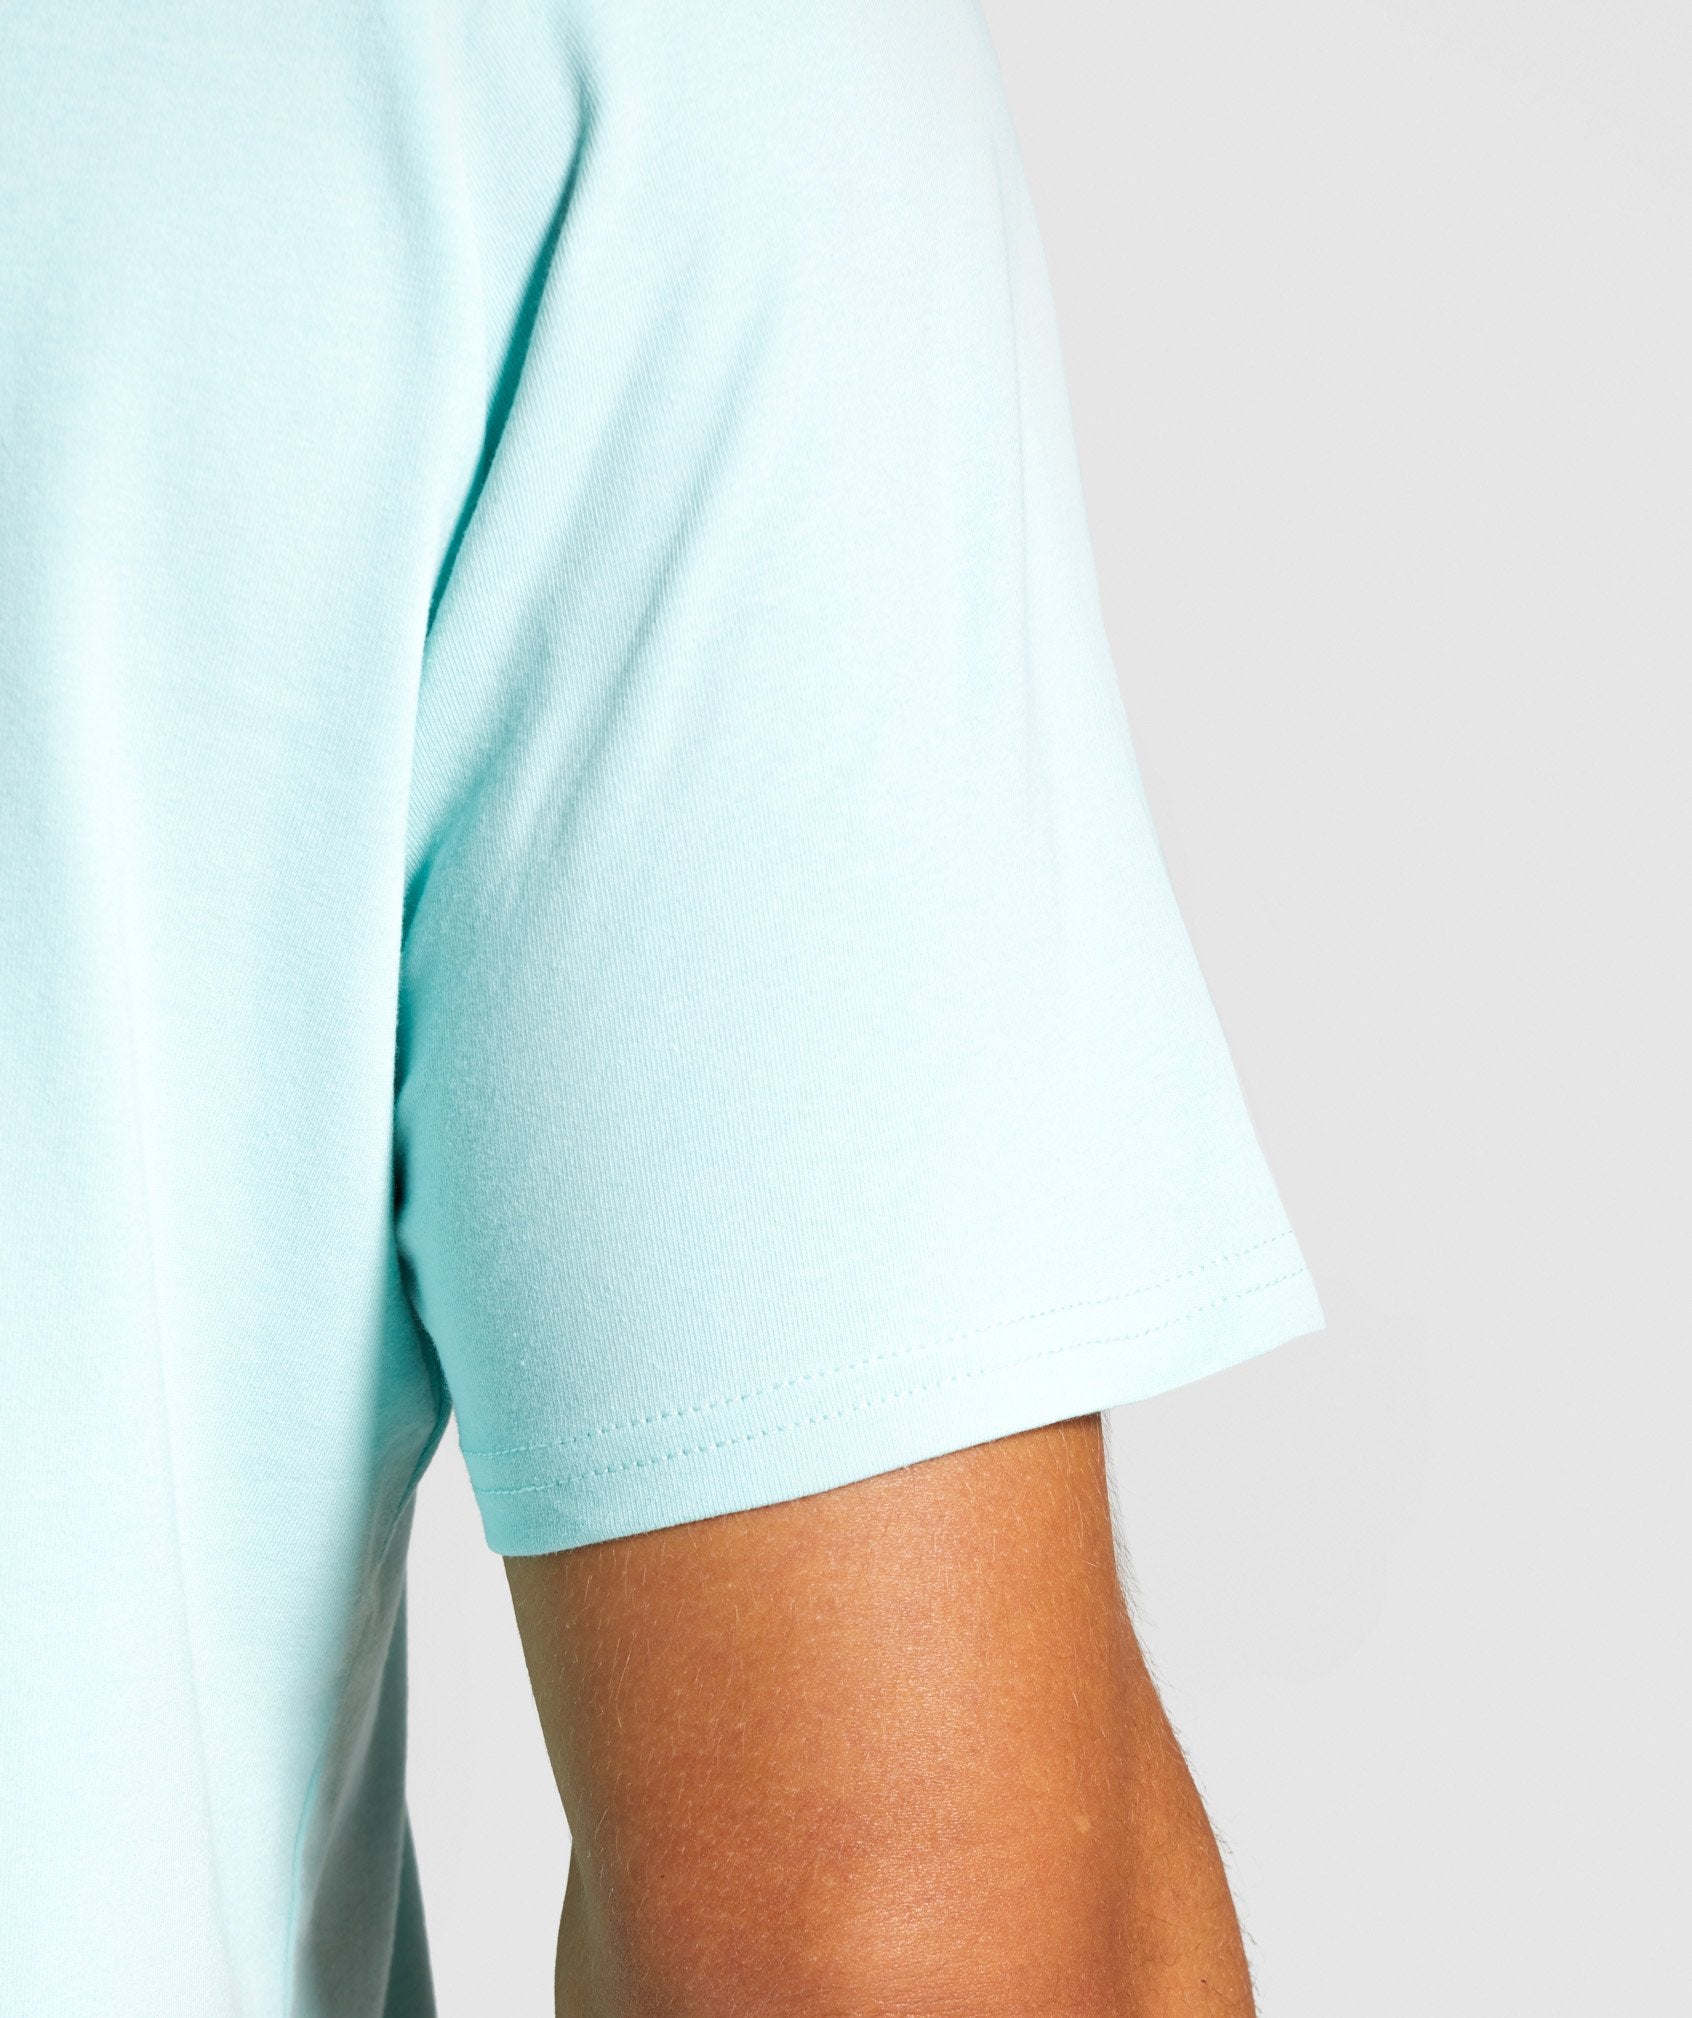 Apollo T-Shirt in Turquoise - view 5